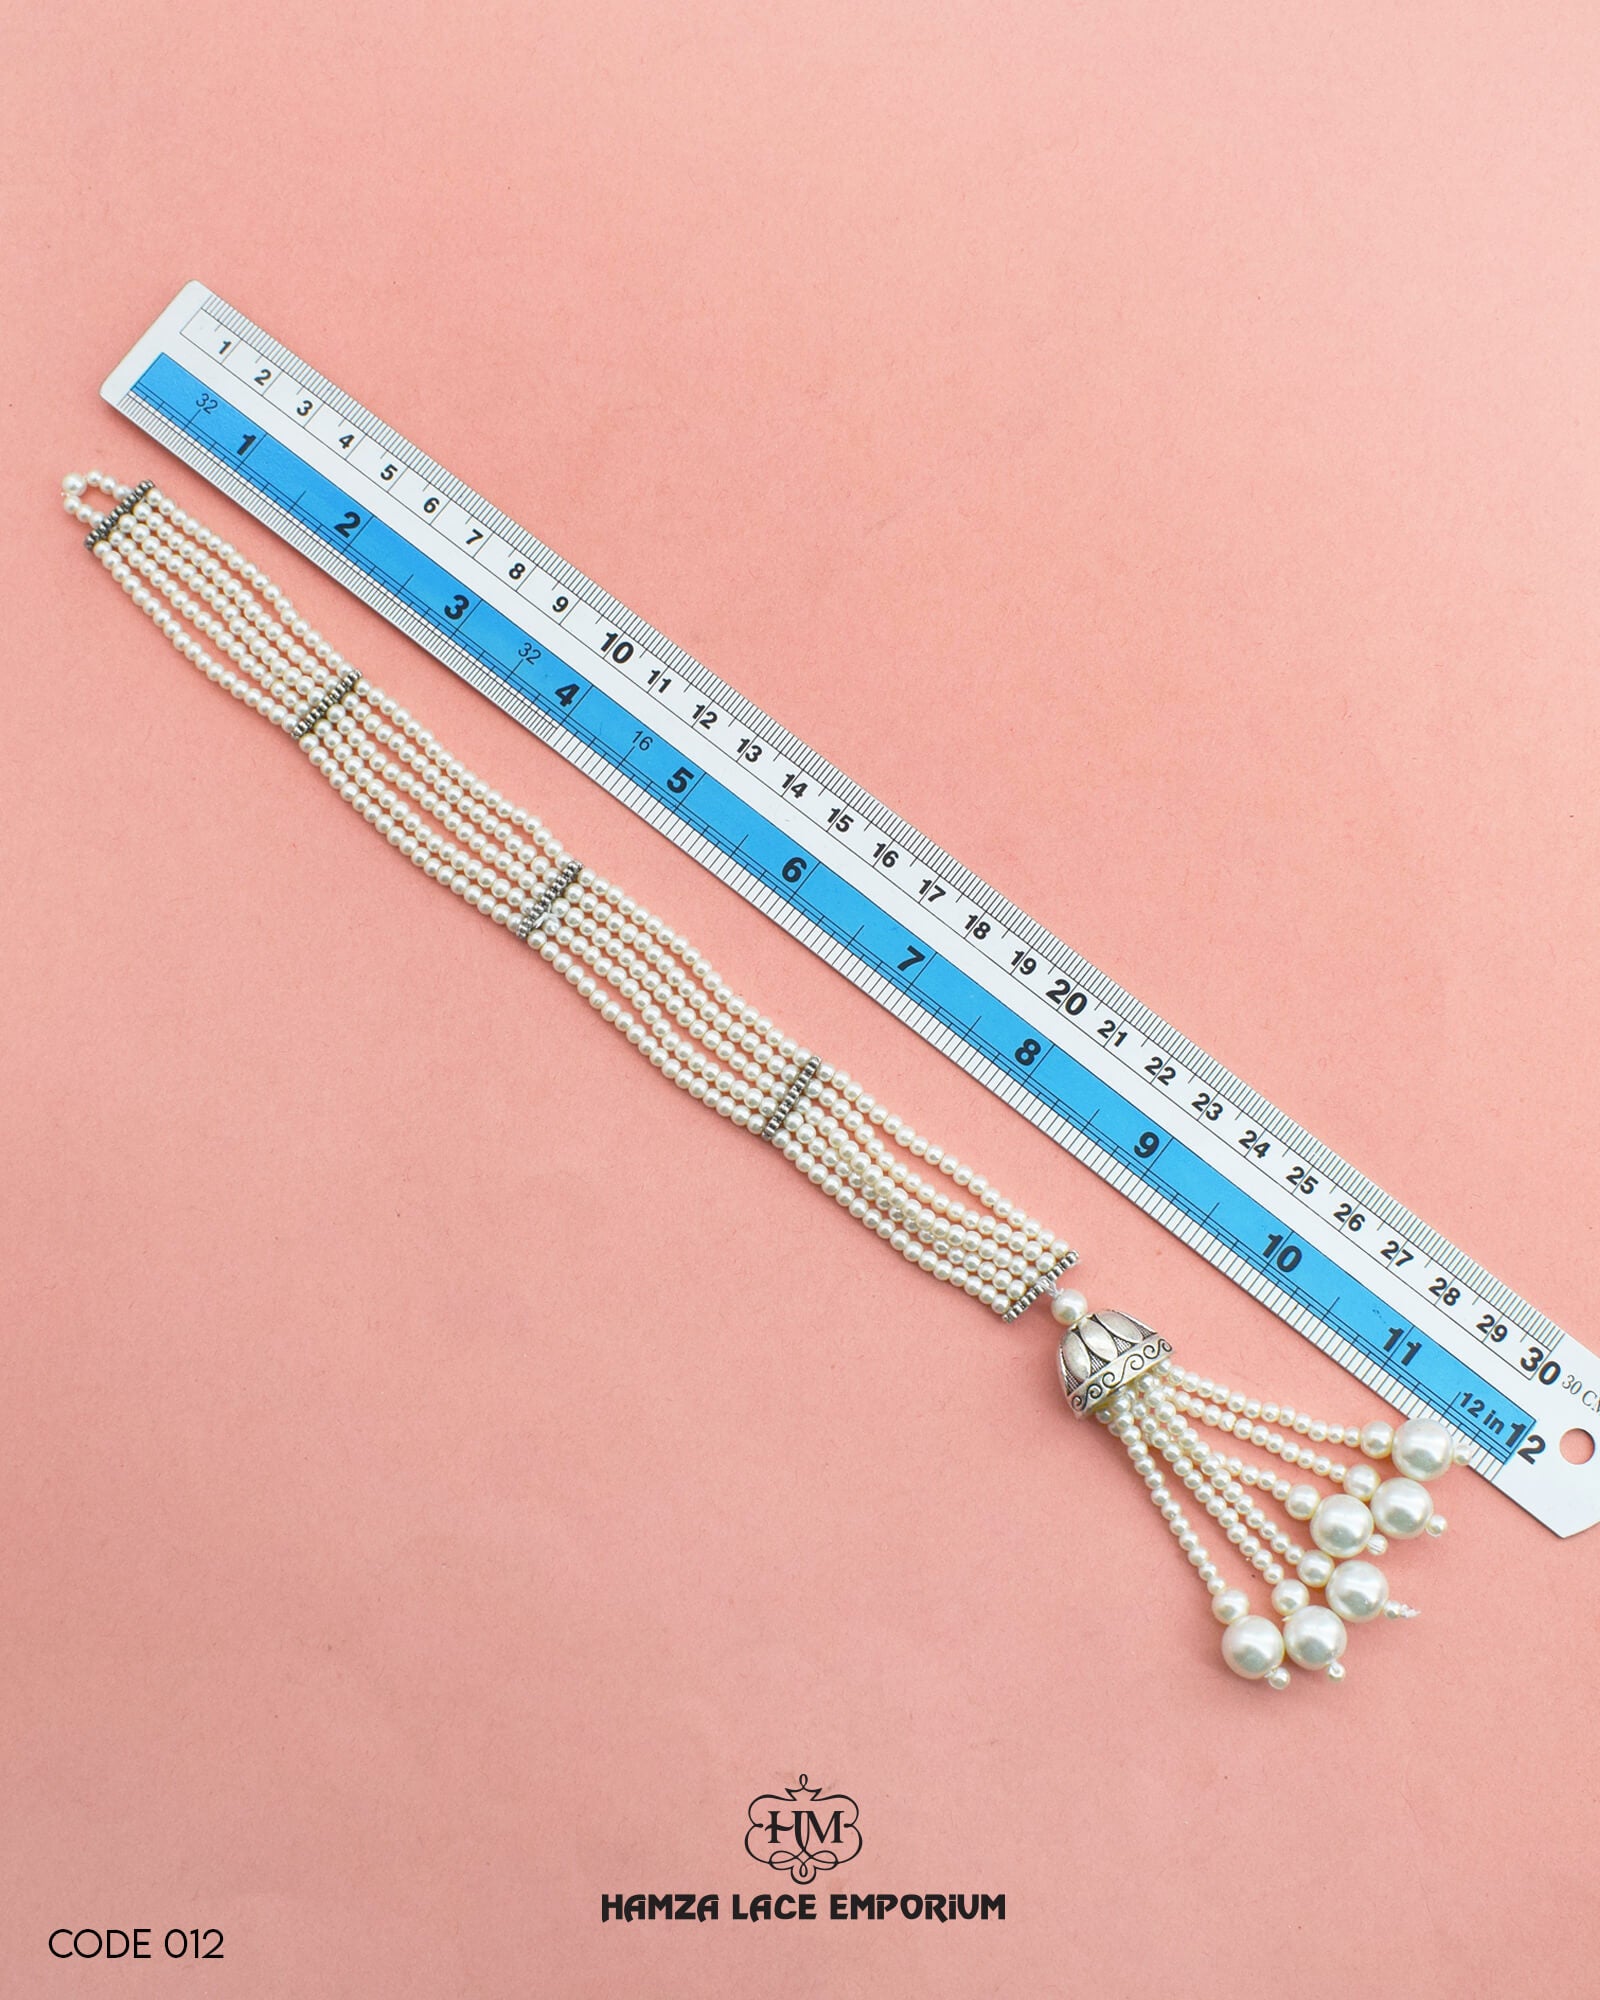 The size of the 'Button Patti 012' is showcased alongside a helpful ruler to visualize and assess the product size accurately.